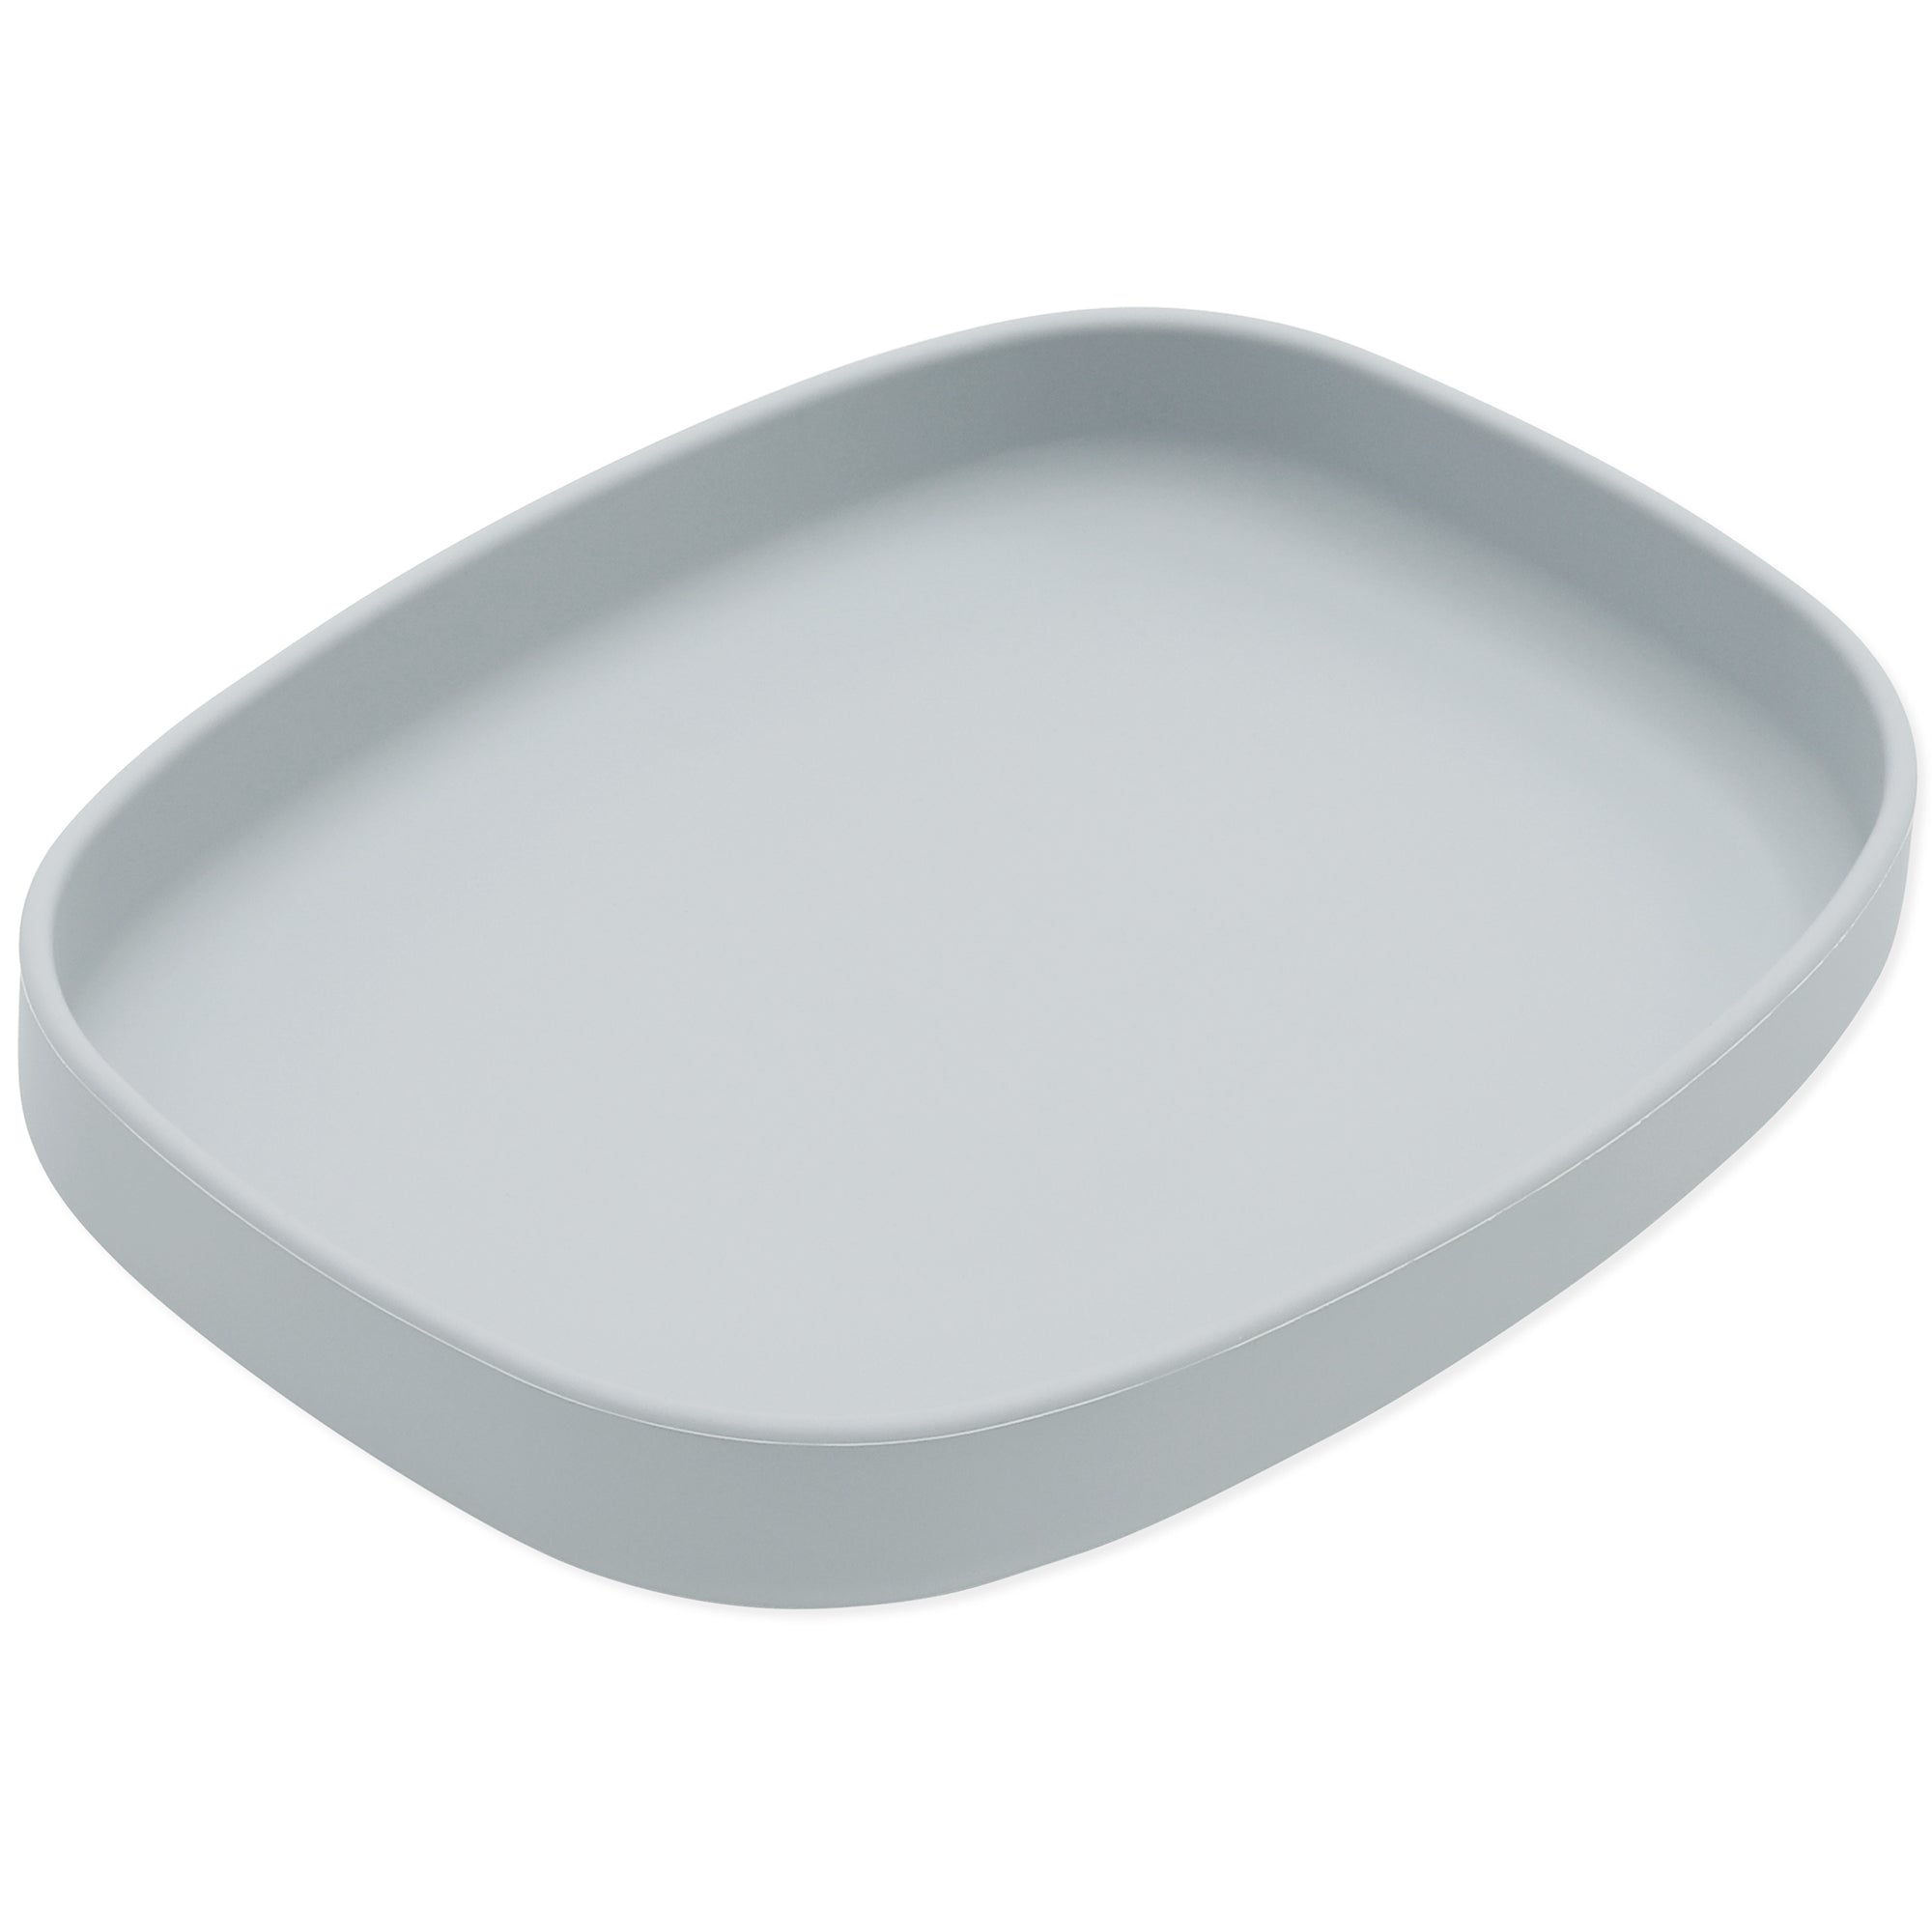 Bumkins Silicone Grip Dish + Stretch Lid Set 5 Section - Gray